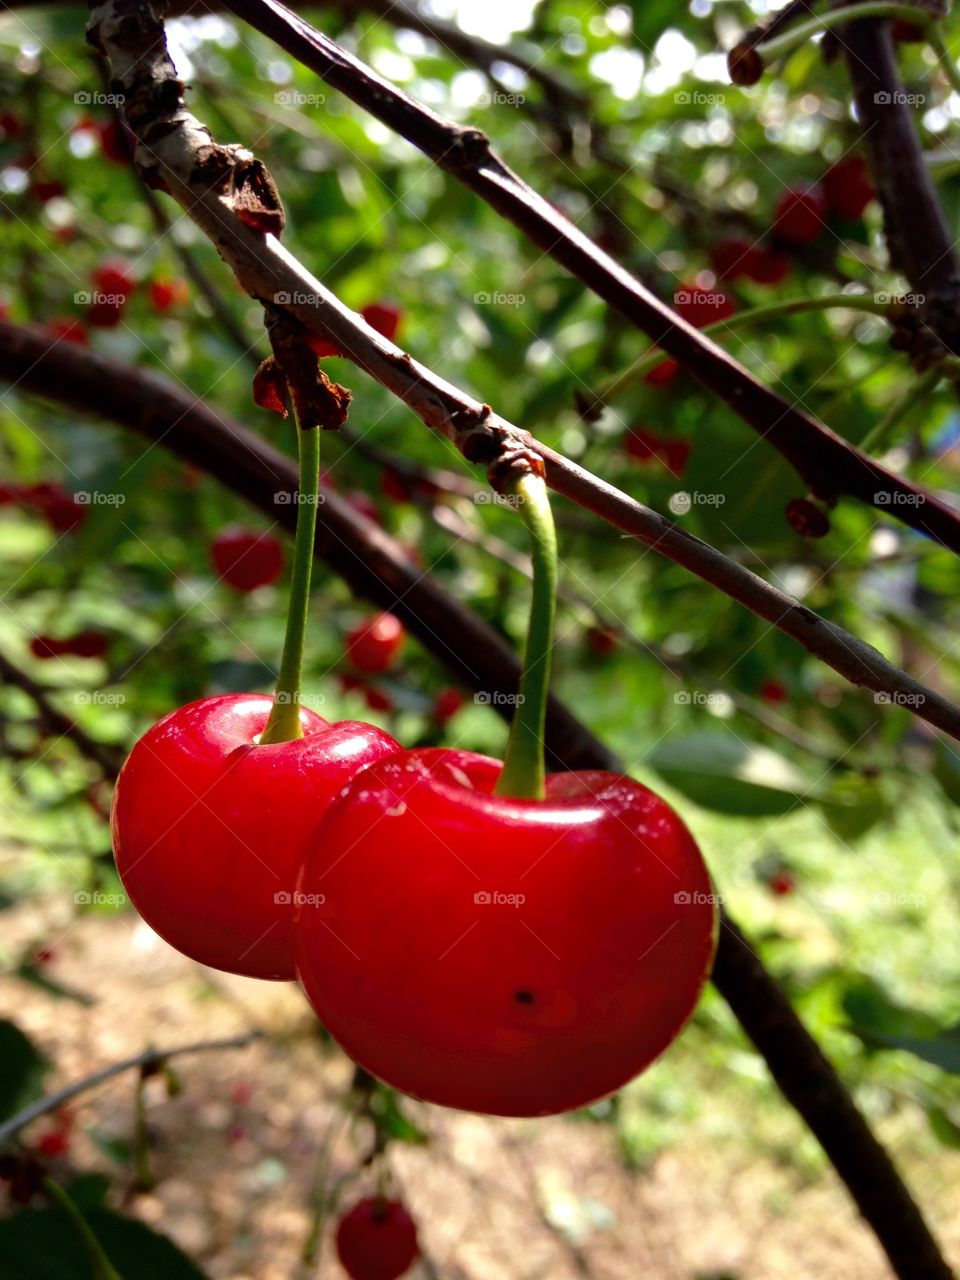 Cherry fruits growing on tree branch